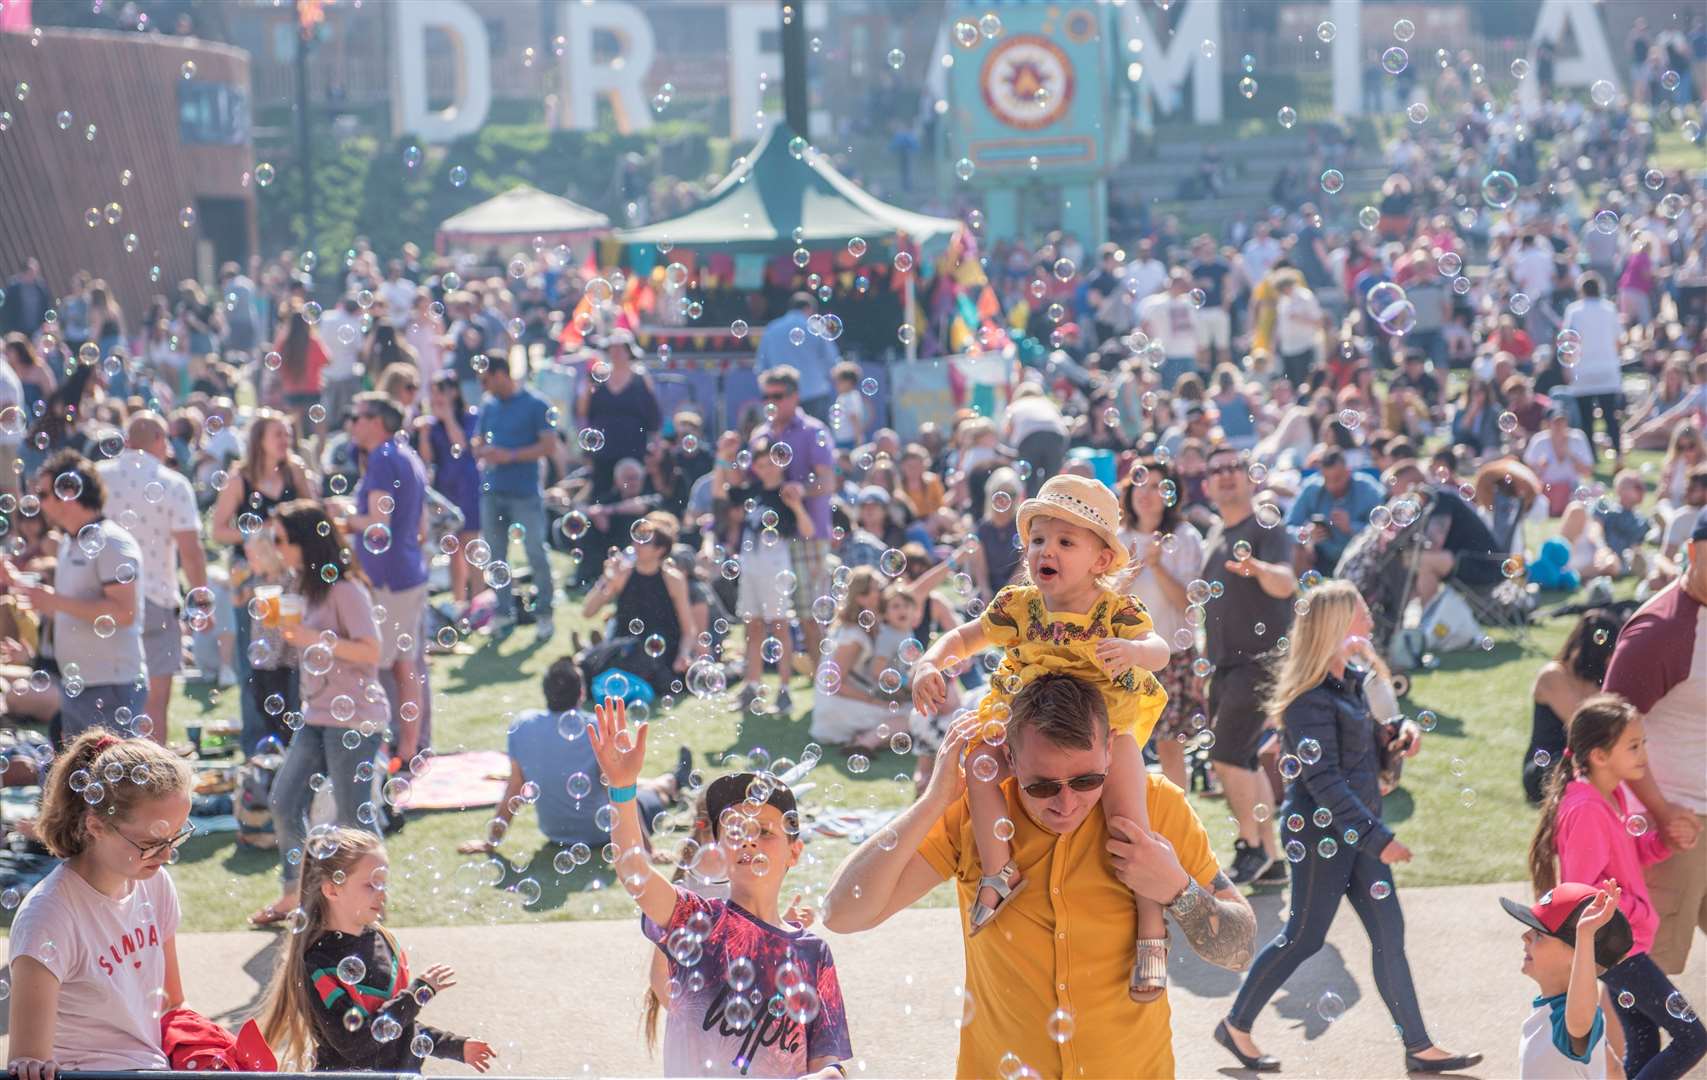 Thousands of people enjoyed last year's Easter event in Margate